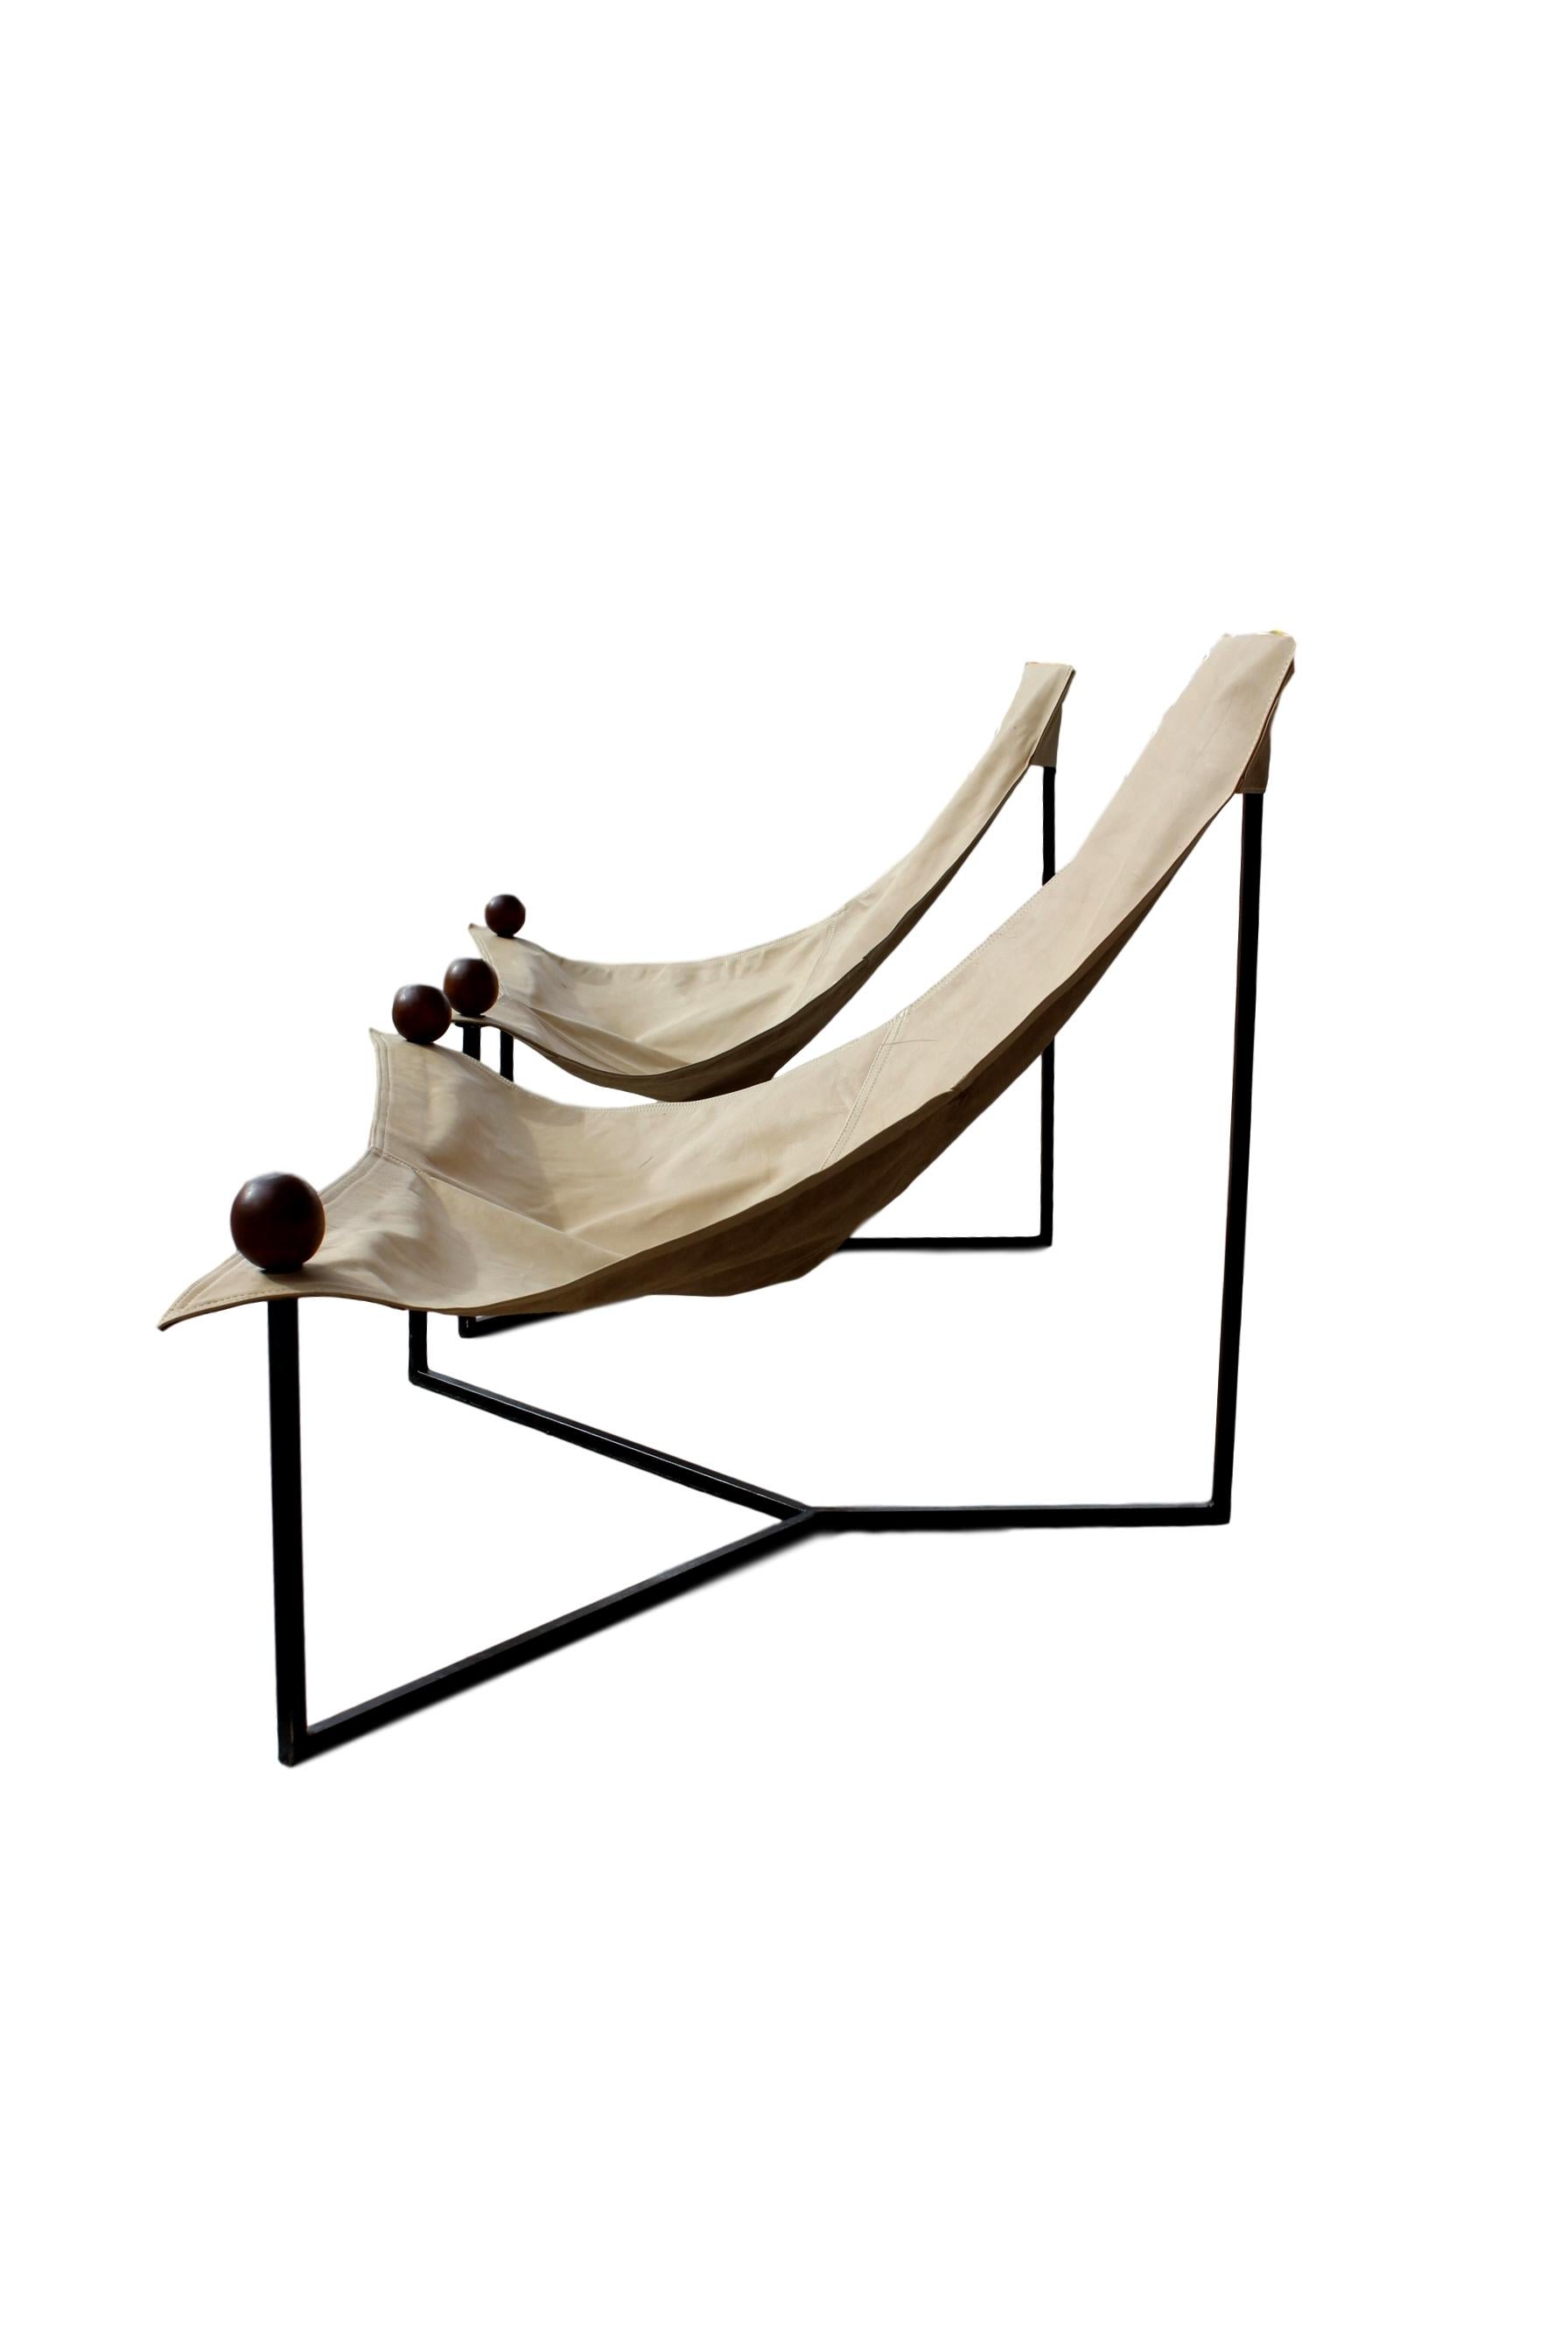 This striking off-white 'Poltrona Triangular' lounge chair was designed by the master of Brazilian modernist design, Jorge Zalszupin. It features 3 legs made of iron, leather seating, and Jacaranda wood end caps.

A Brazilian émigré of Polish